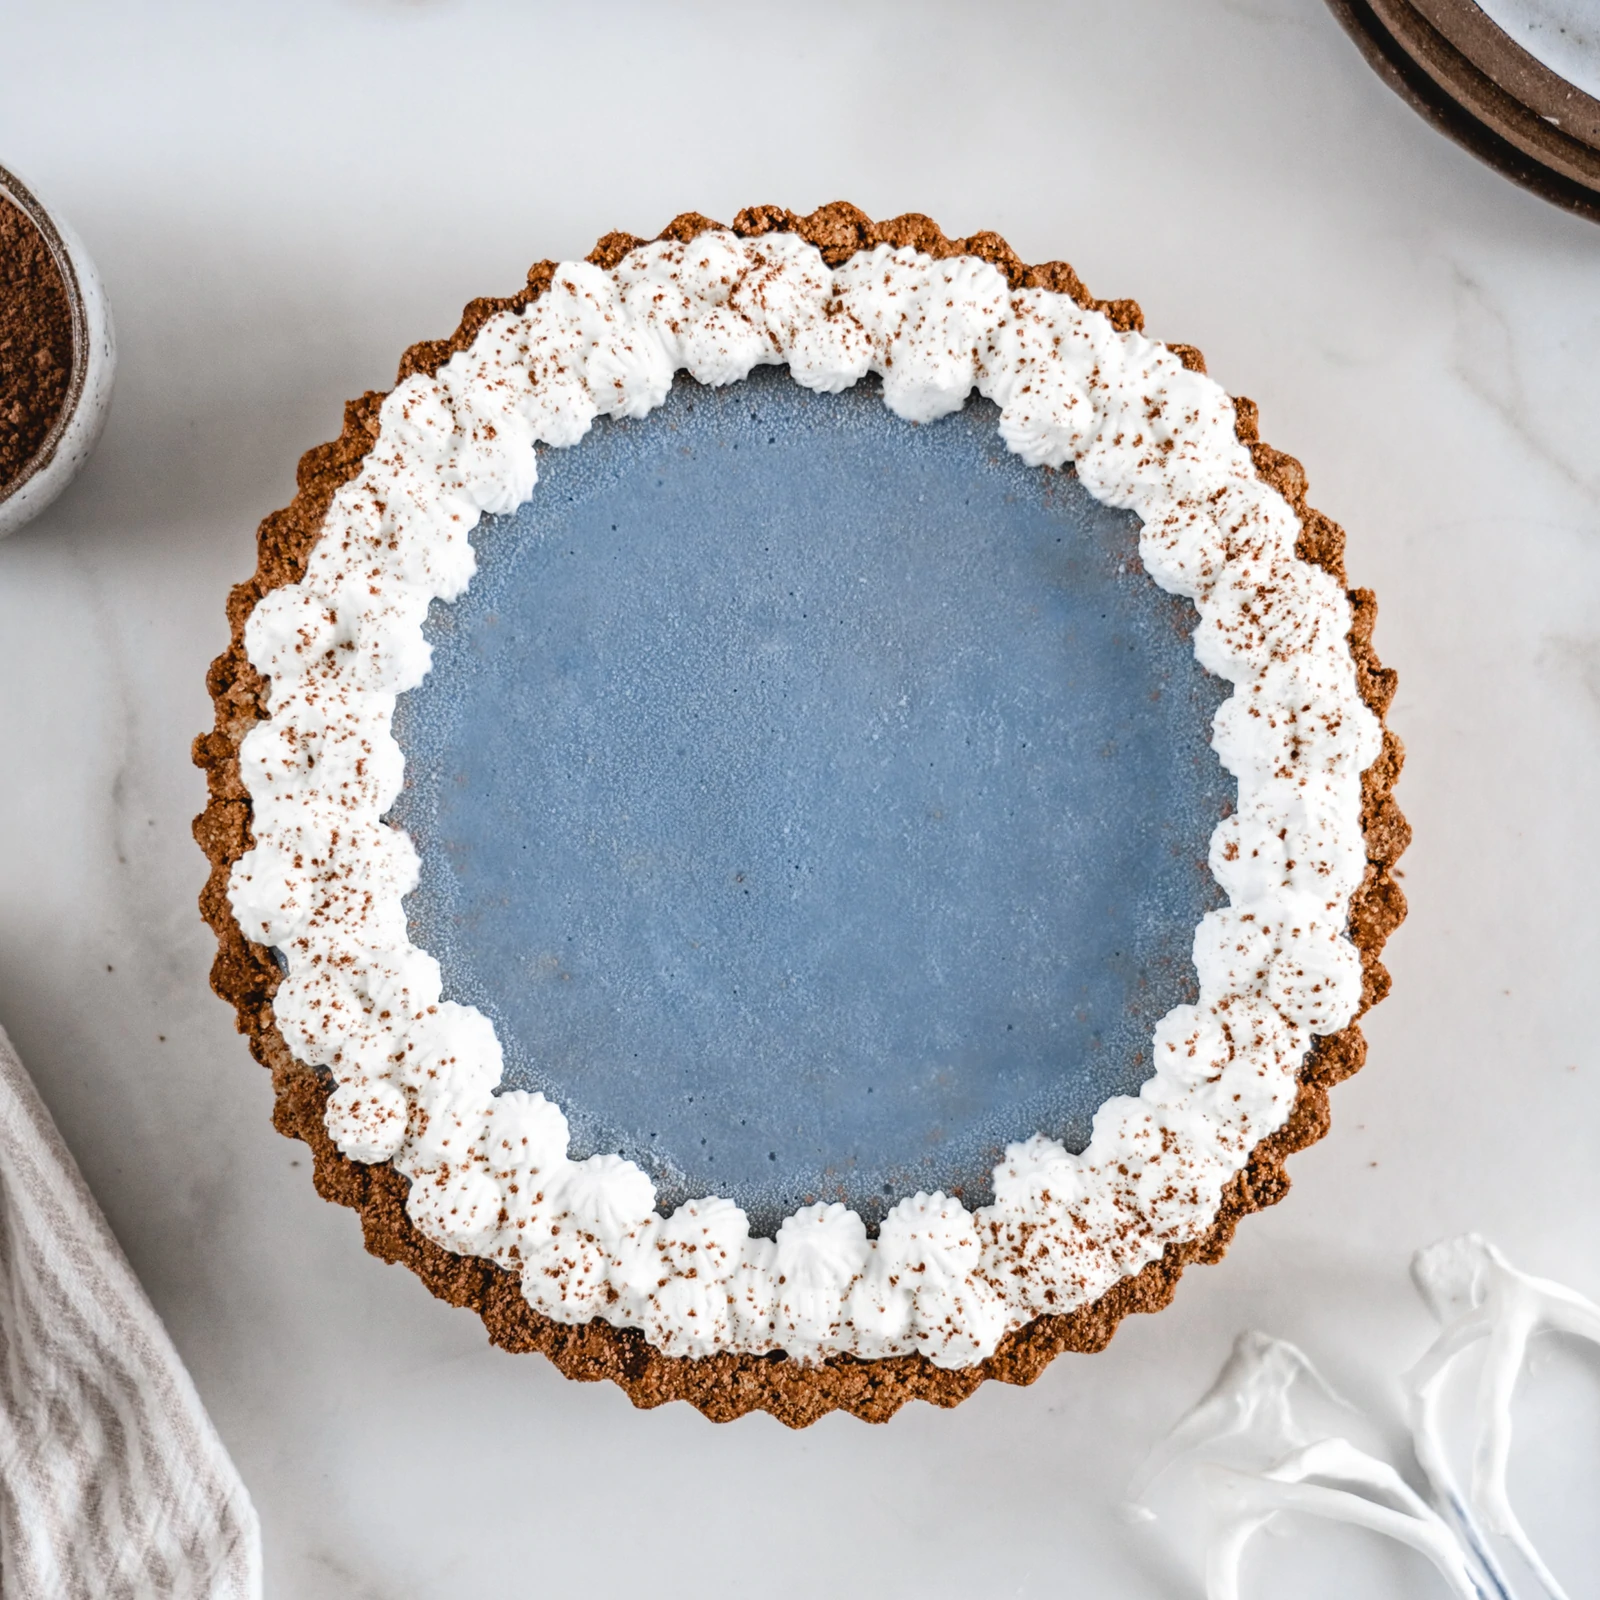 Golden brown crust Almond Cow Tart filled with a blueberry filling and topped with coconut whipped cream